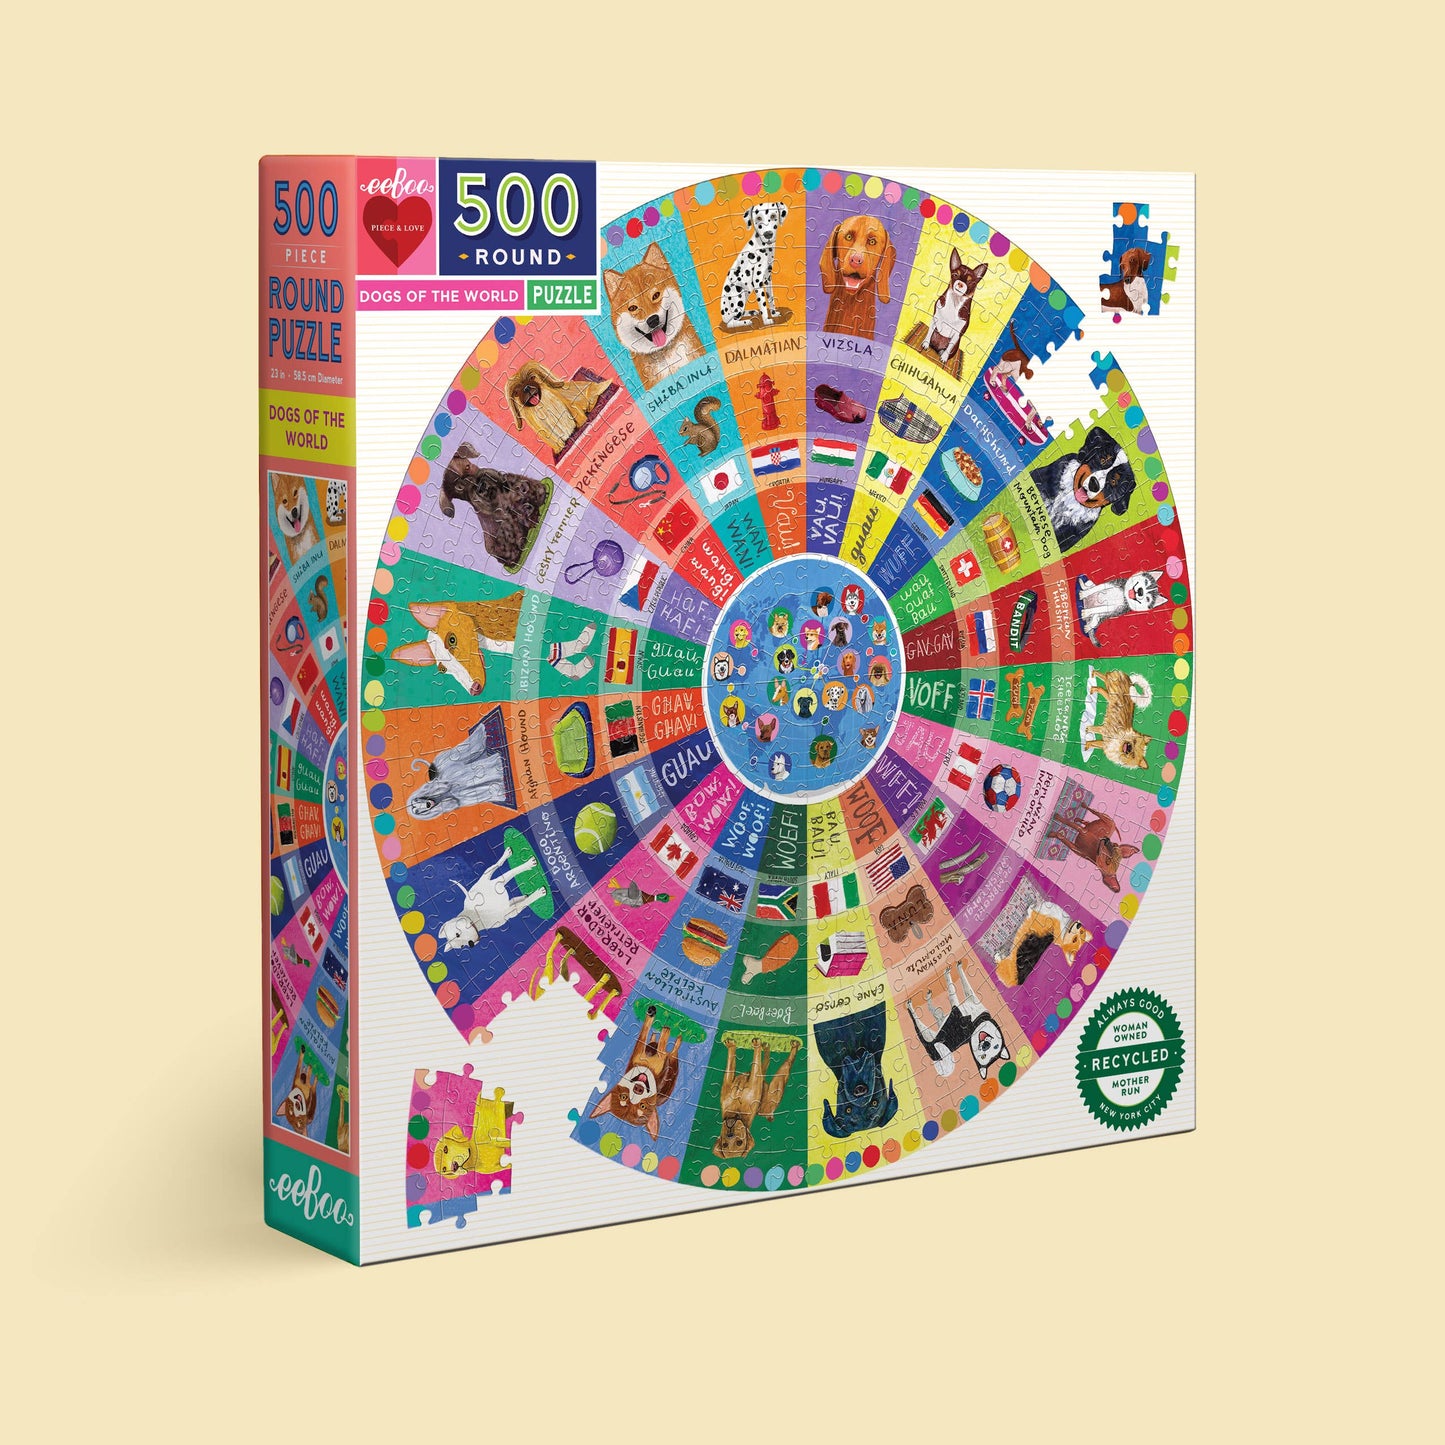 Dogs of the World 500 Round Puzzle